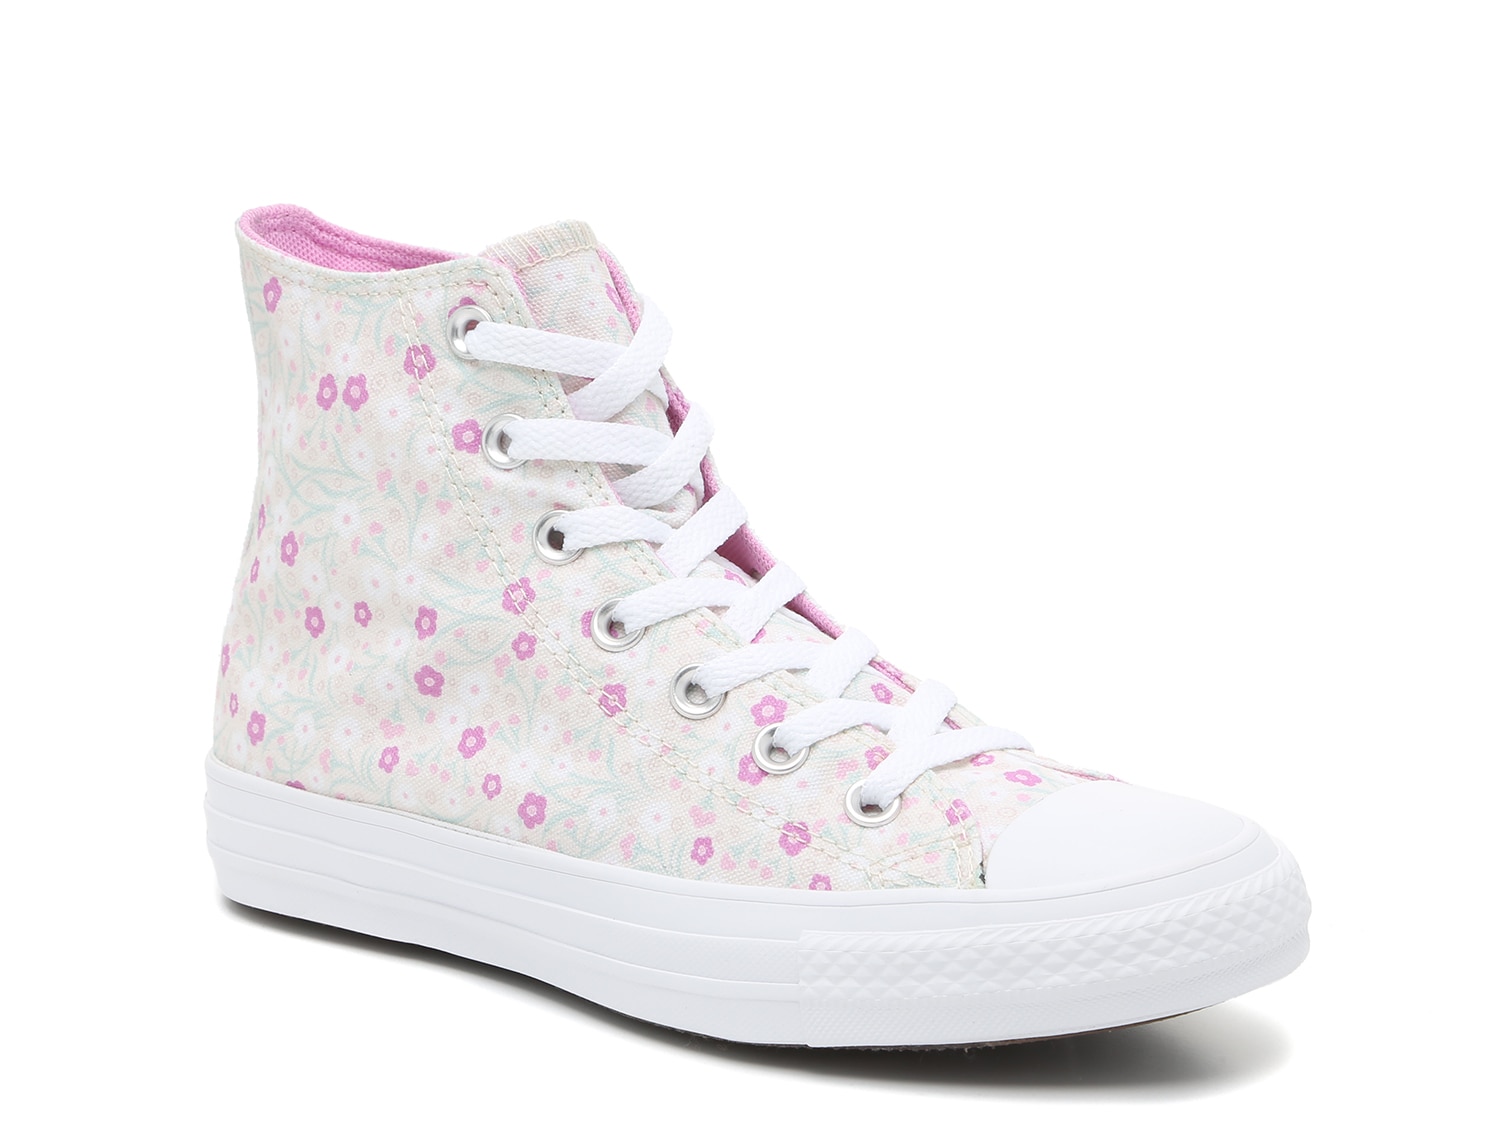 mercenary Activate Tangle Converse Chuck Taylor All Star Floral High-Top Sneaker - Women's | DSW